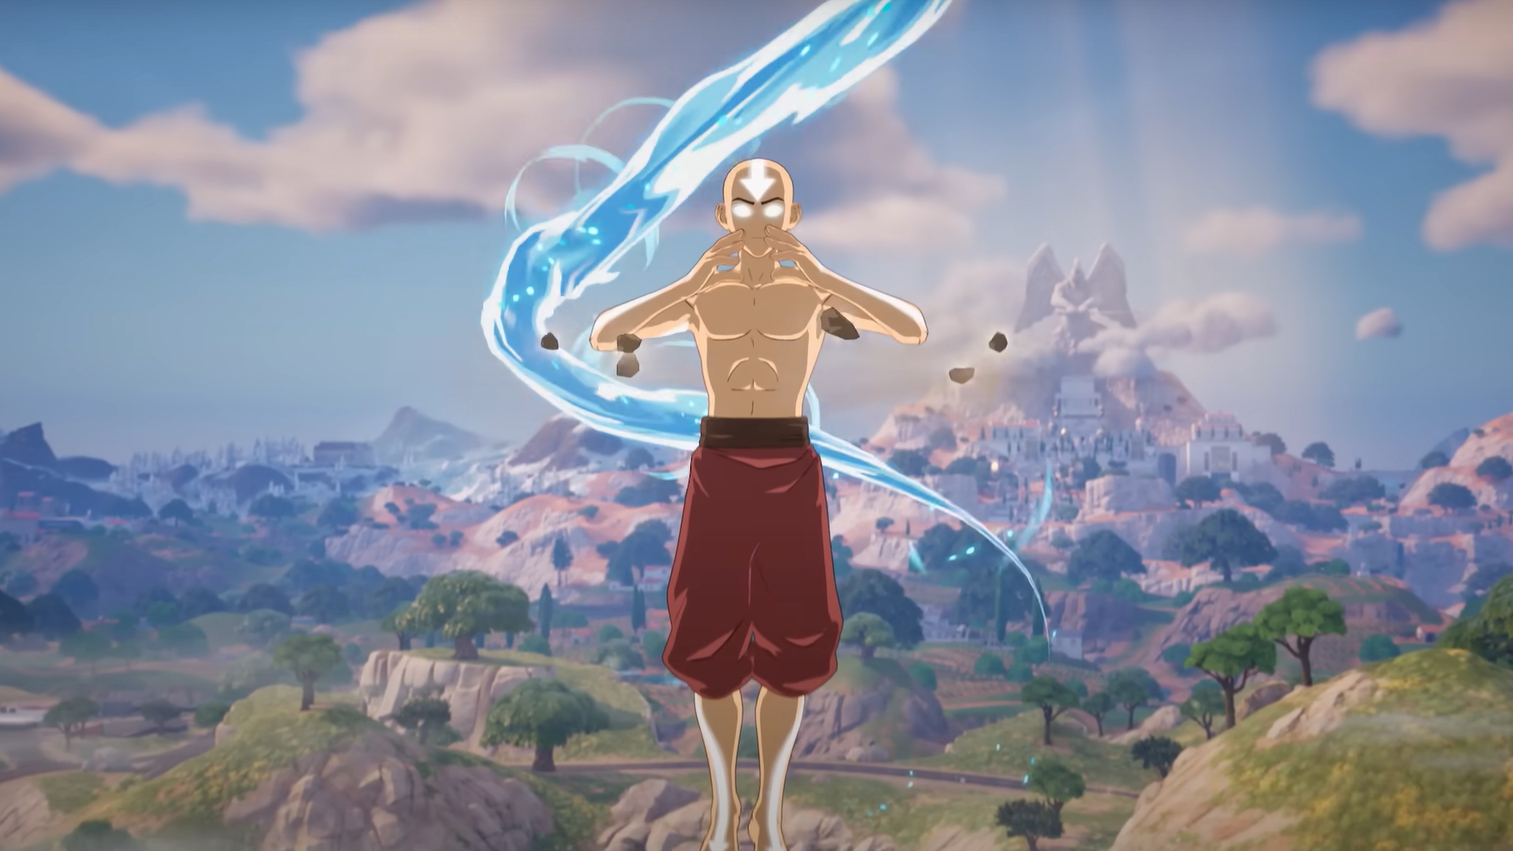 Fortnite fans are losing love for the airbending mythic as it continues to dominate the endgame